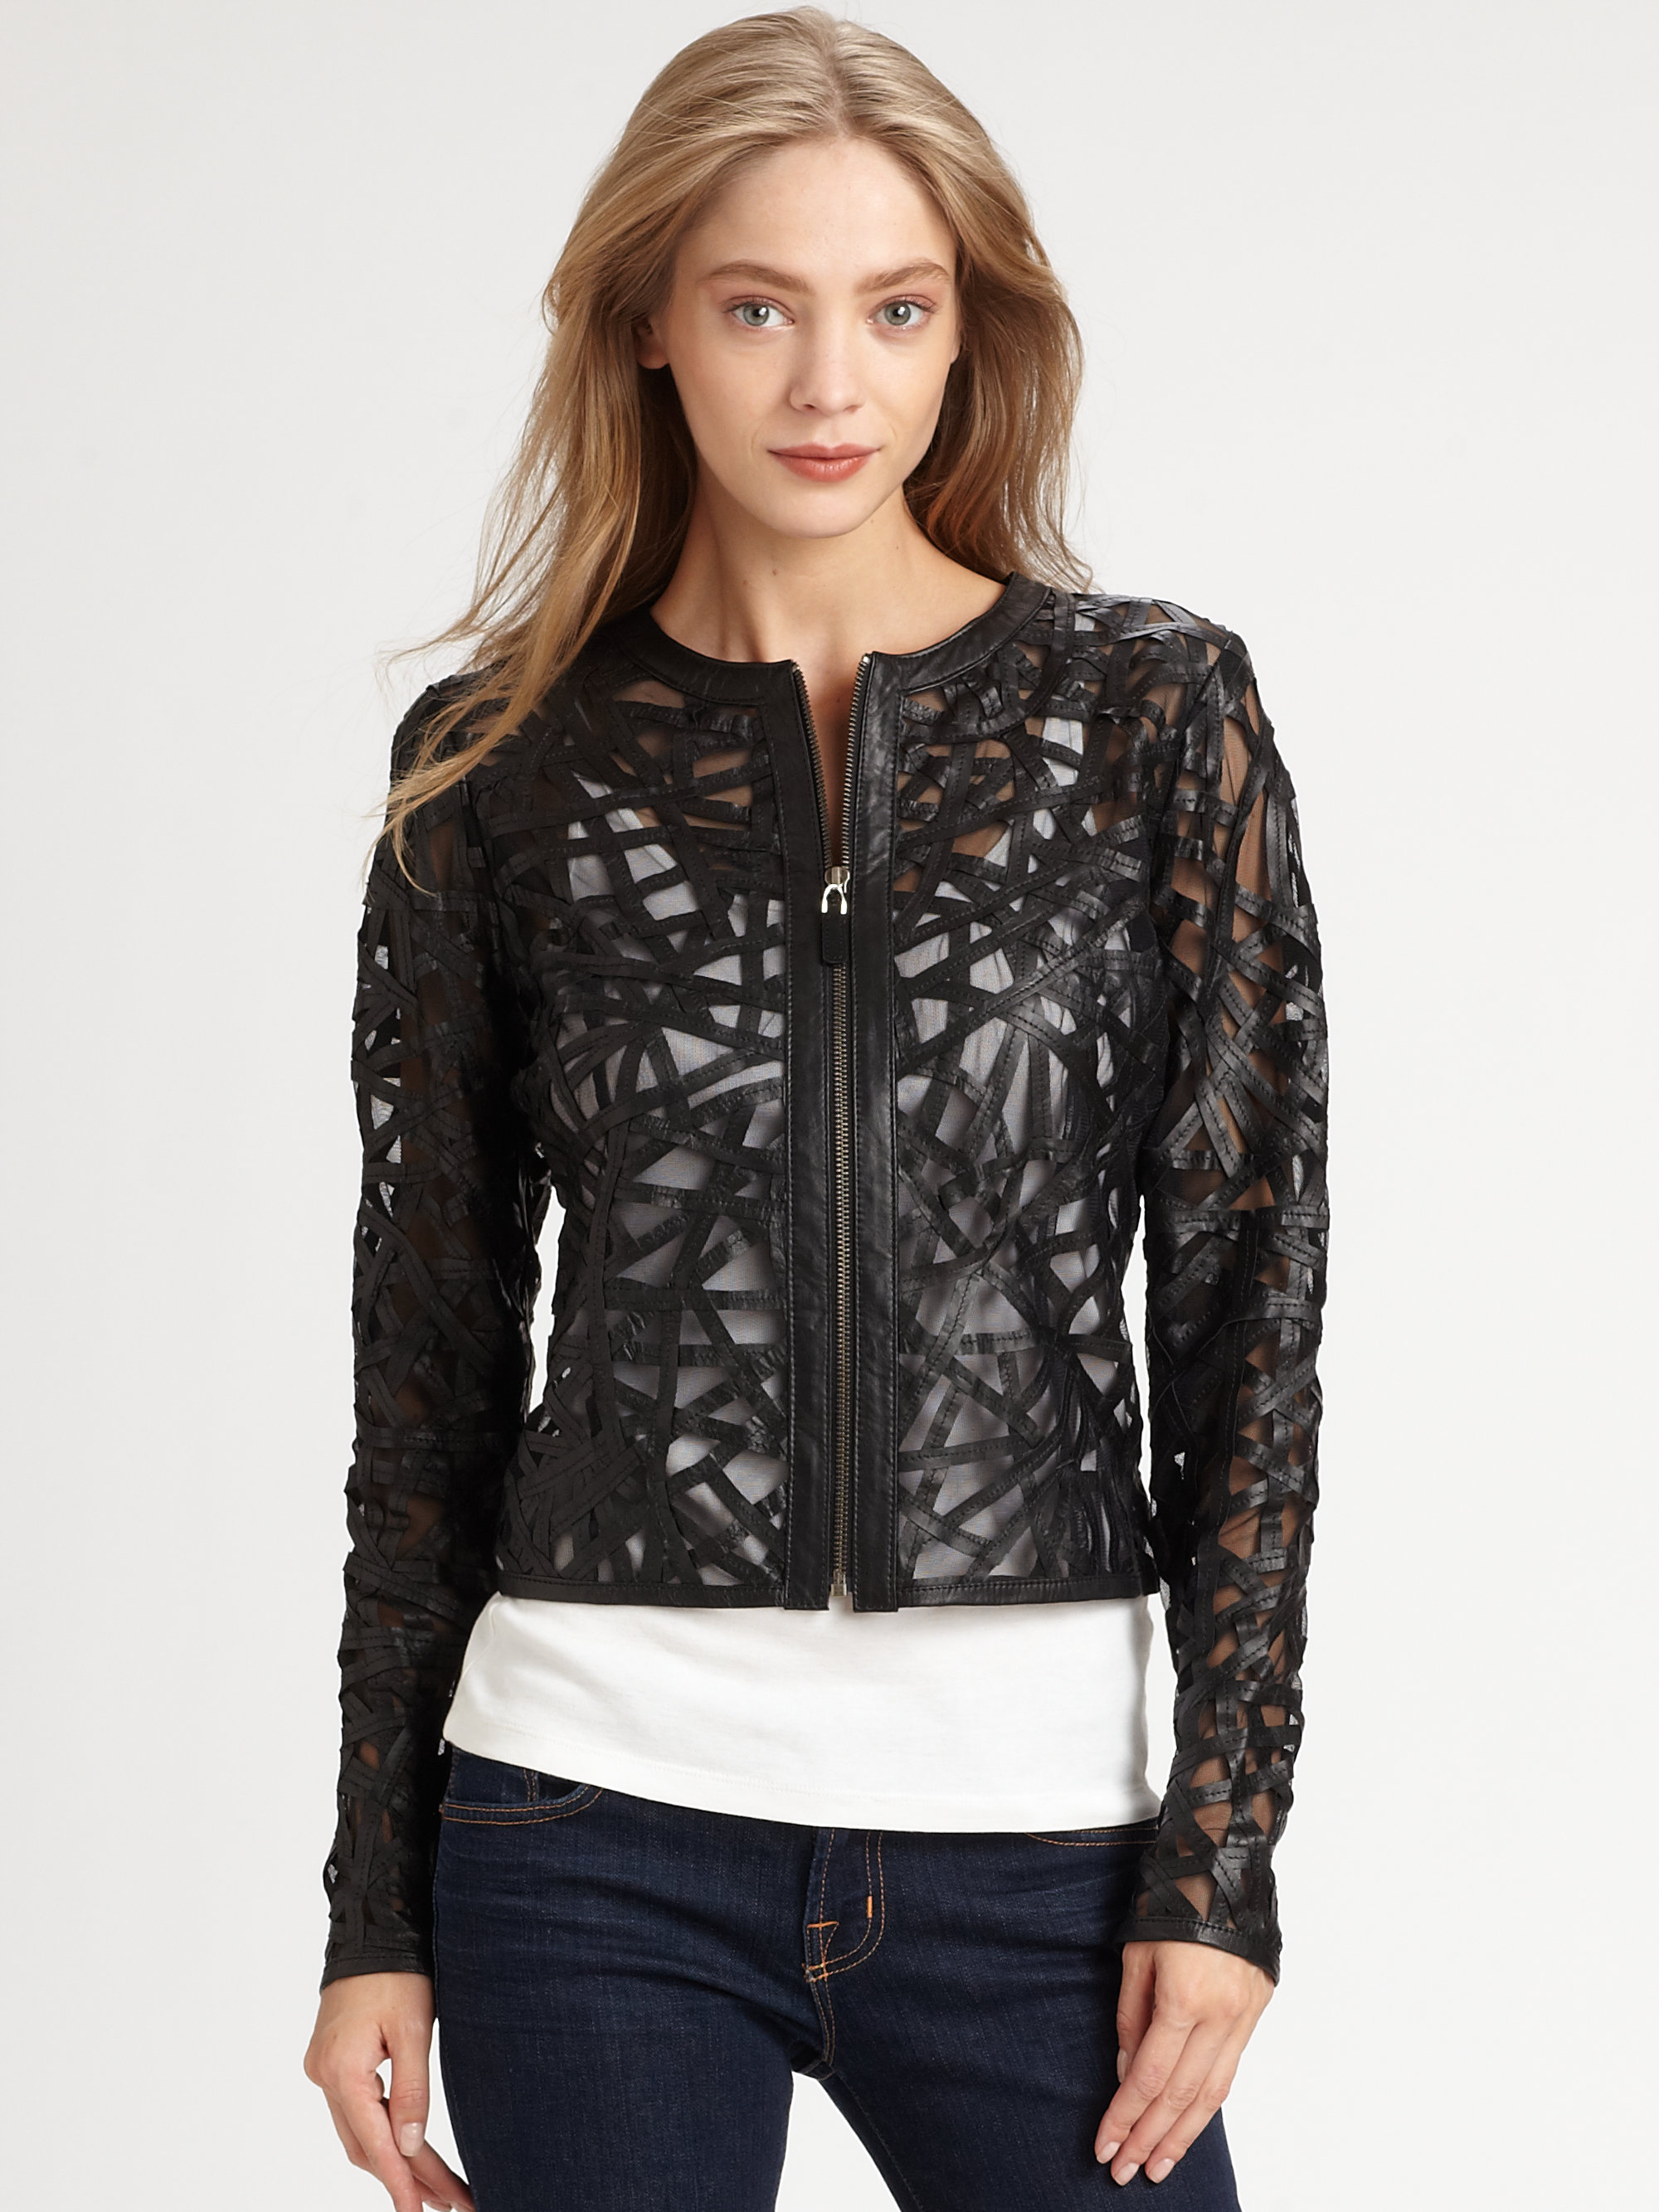 Royal Underground Twisted Cutout Leather Jacket in Black | Lyst